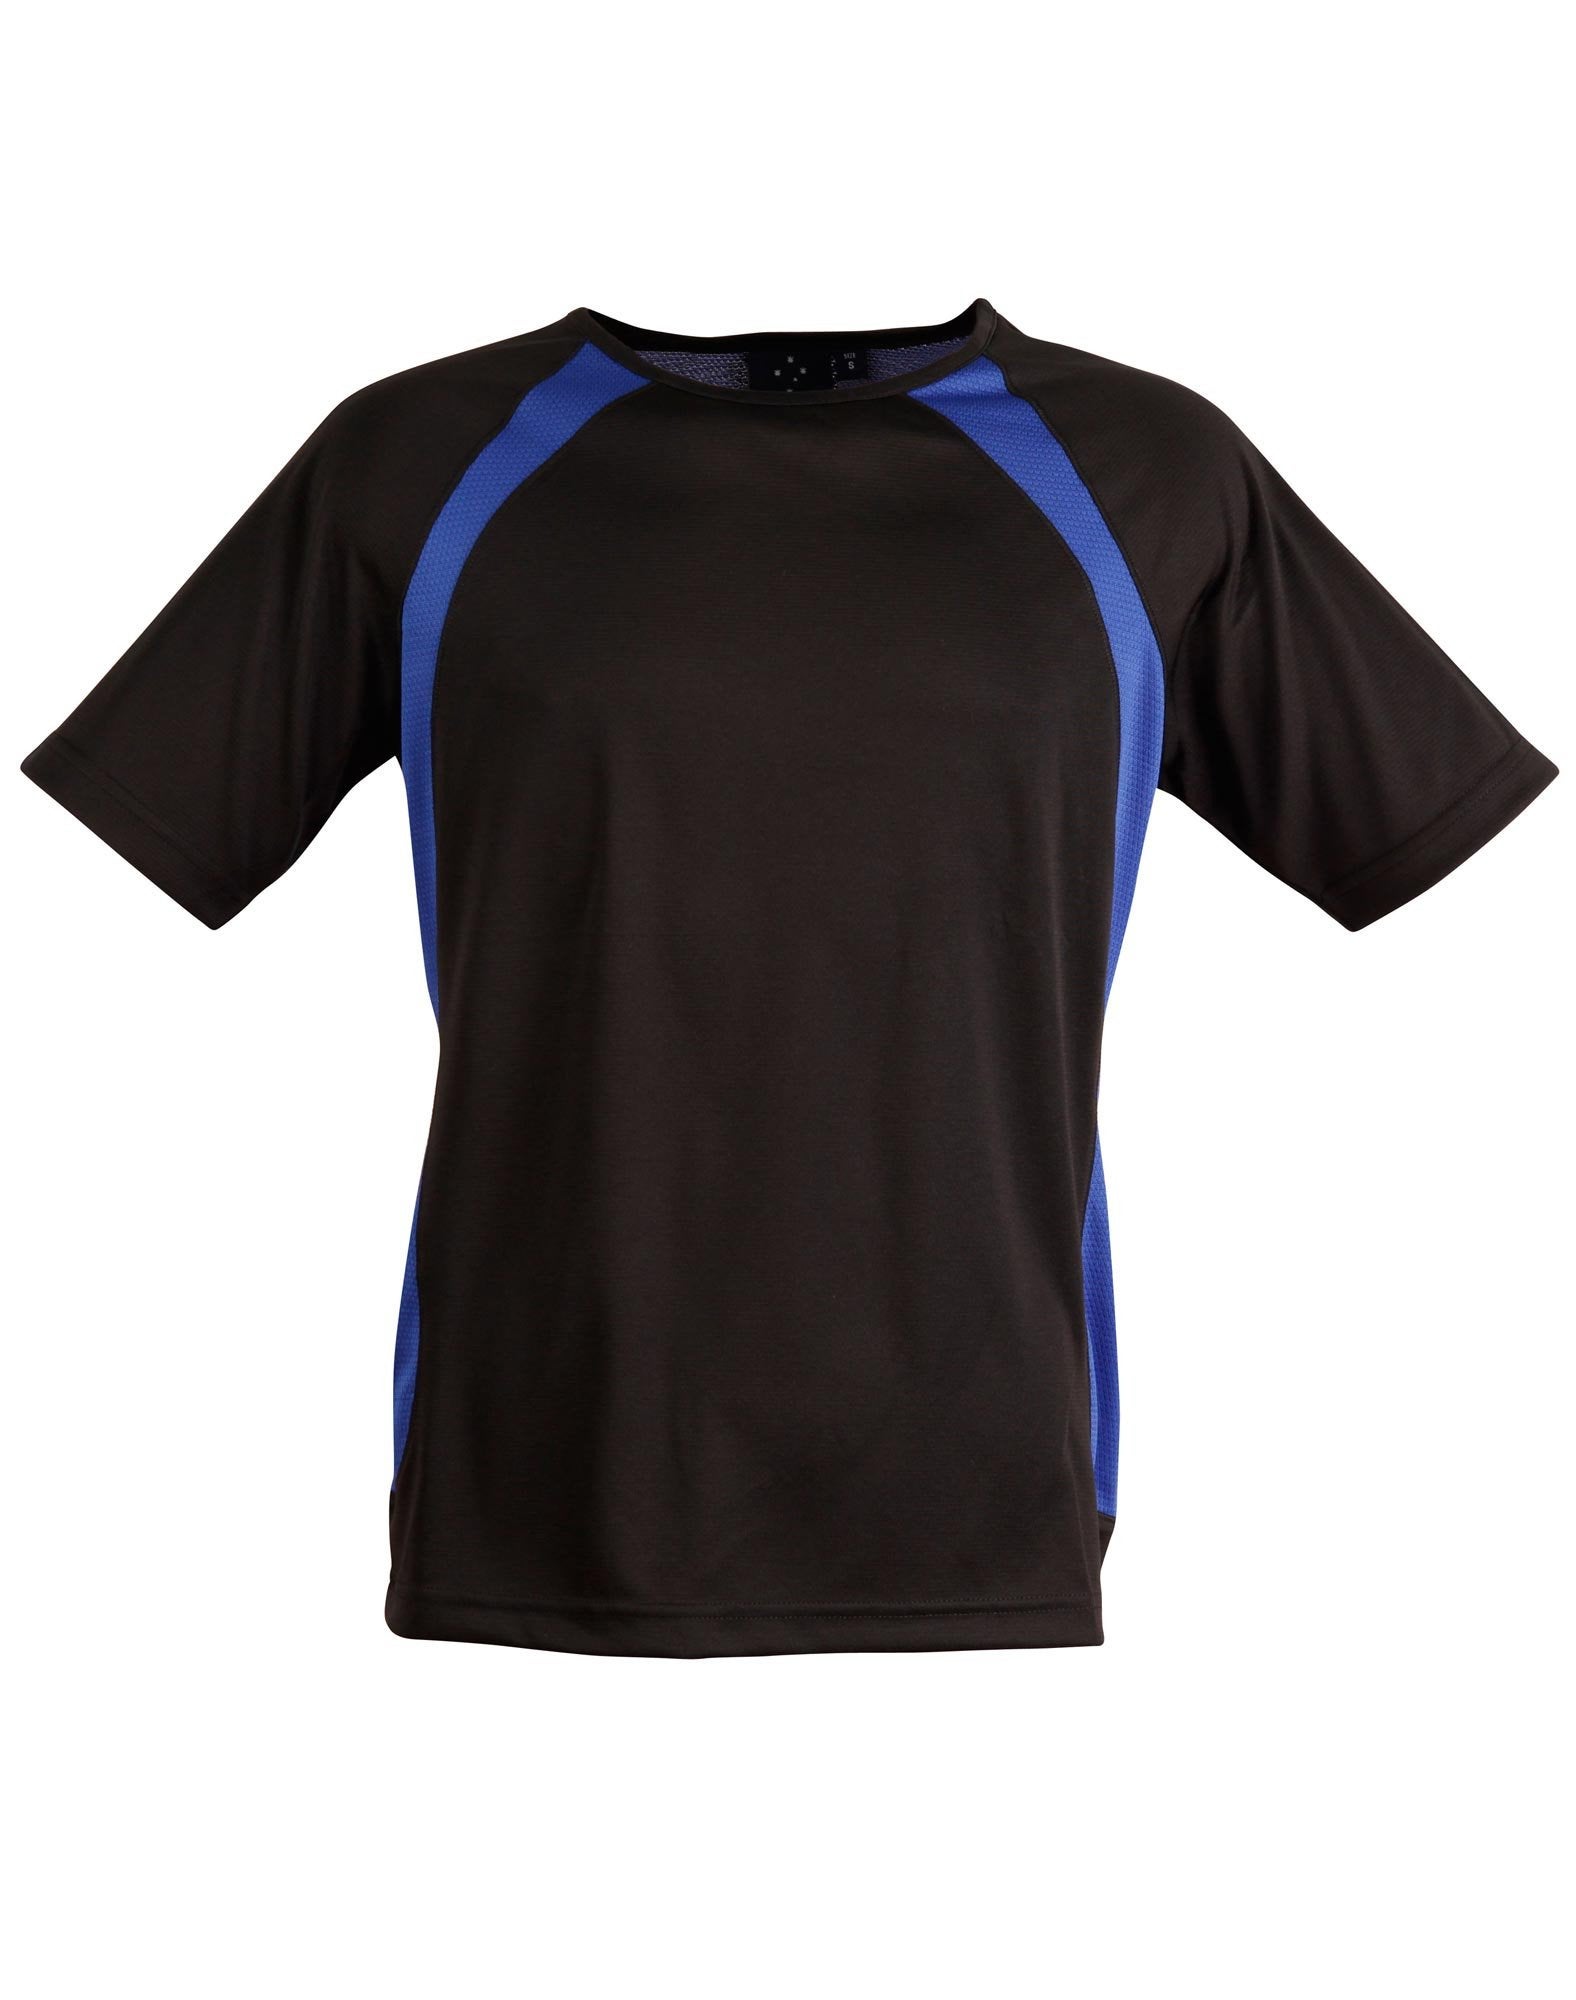 Buy custom branded Men's Sprint Tee Shirts with your logo!